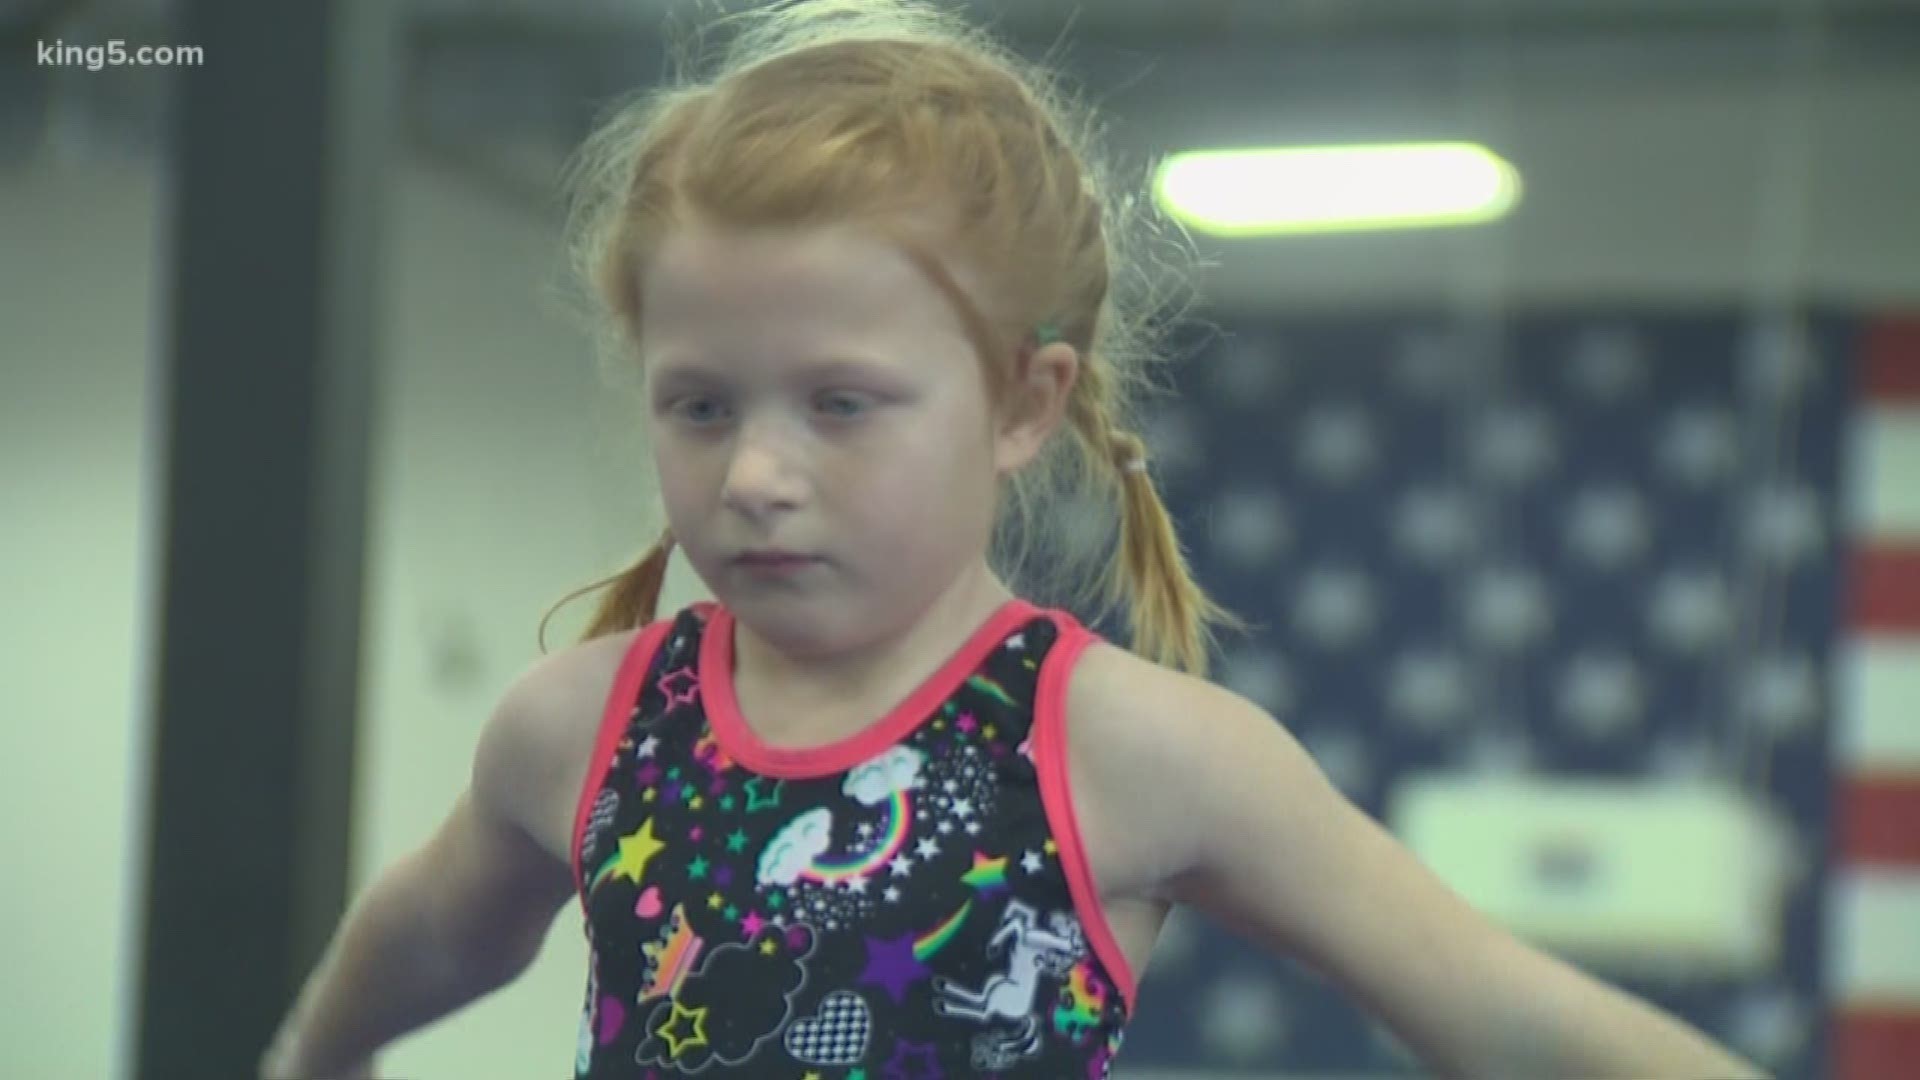 Abbey is 7-years-old. She is a budding gymnast with progressive hearing loss, and is out to show other kids with disabilities that they can do anything they put their mind to.